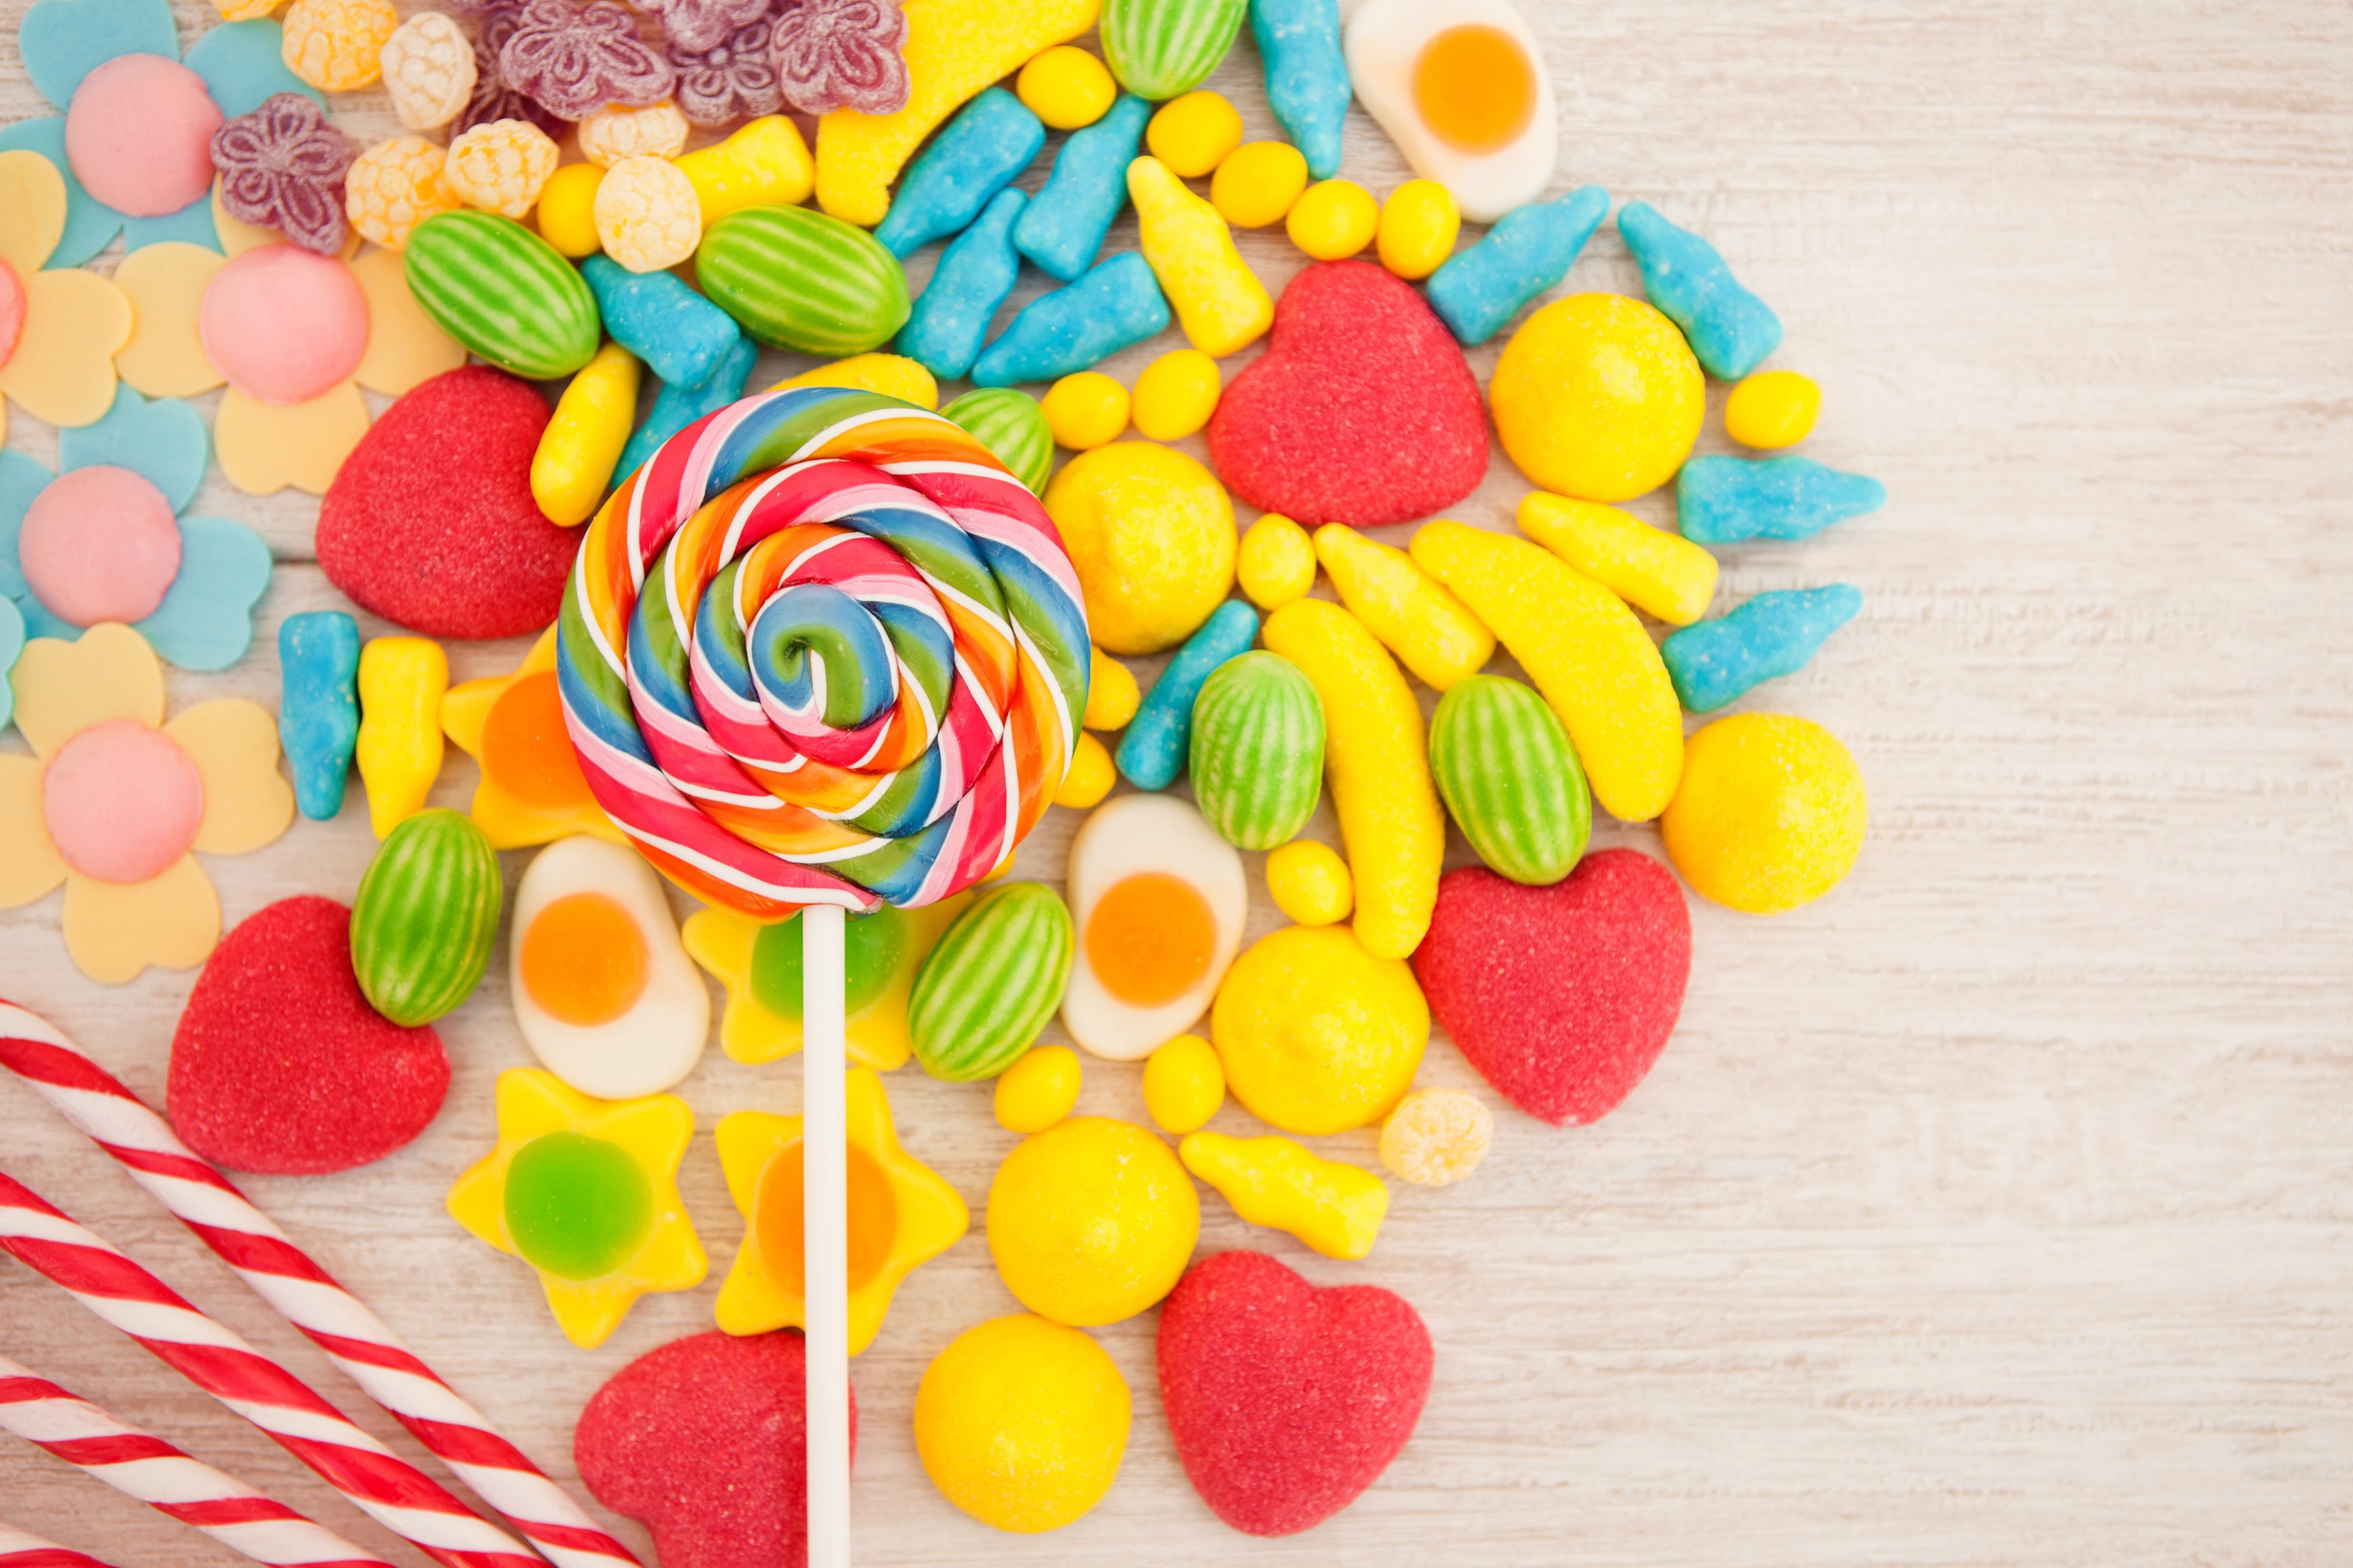 Colorful Food Sweets Candy Lollipop 3176x2117